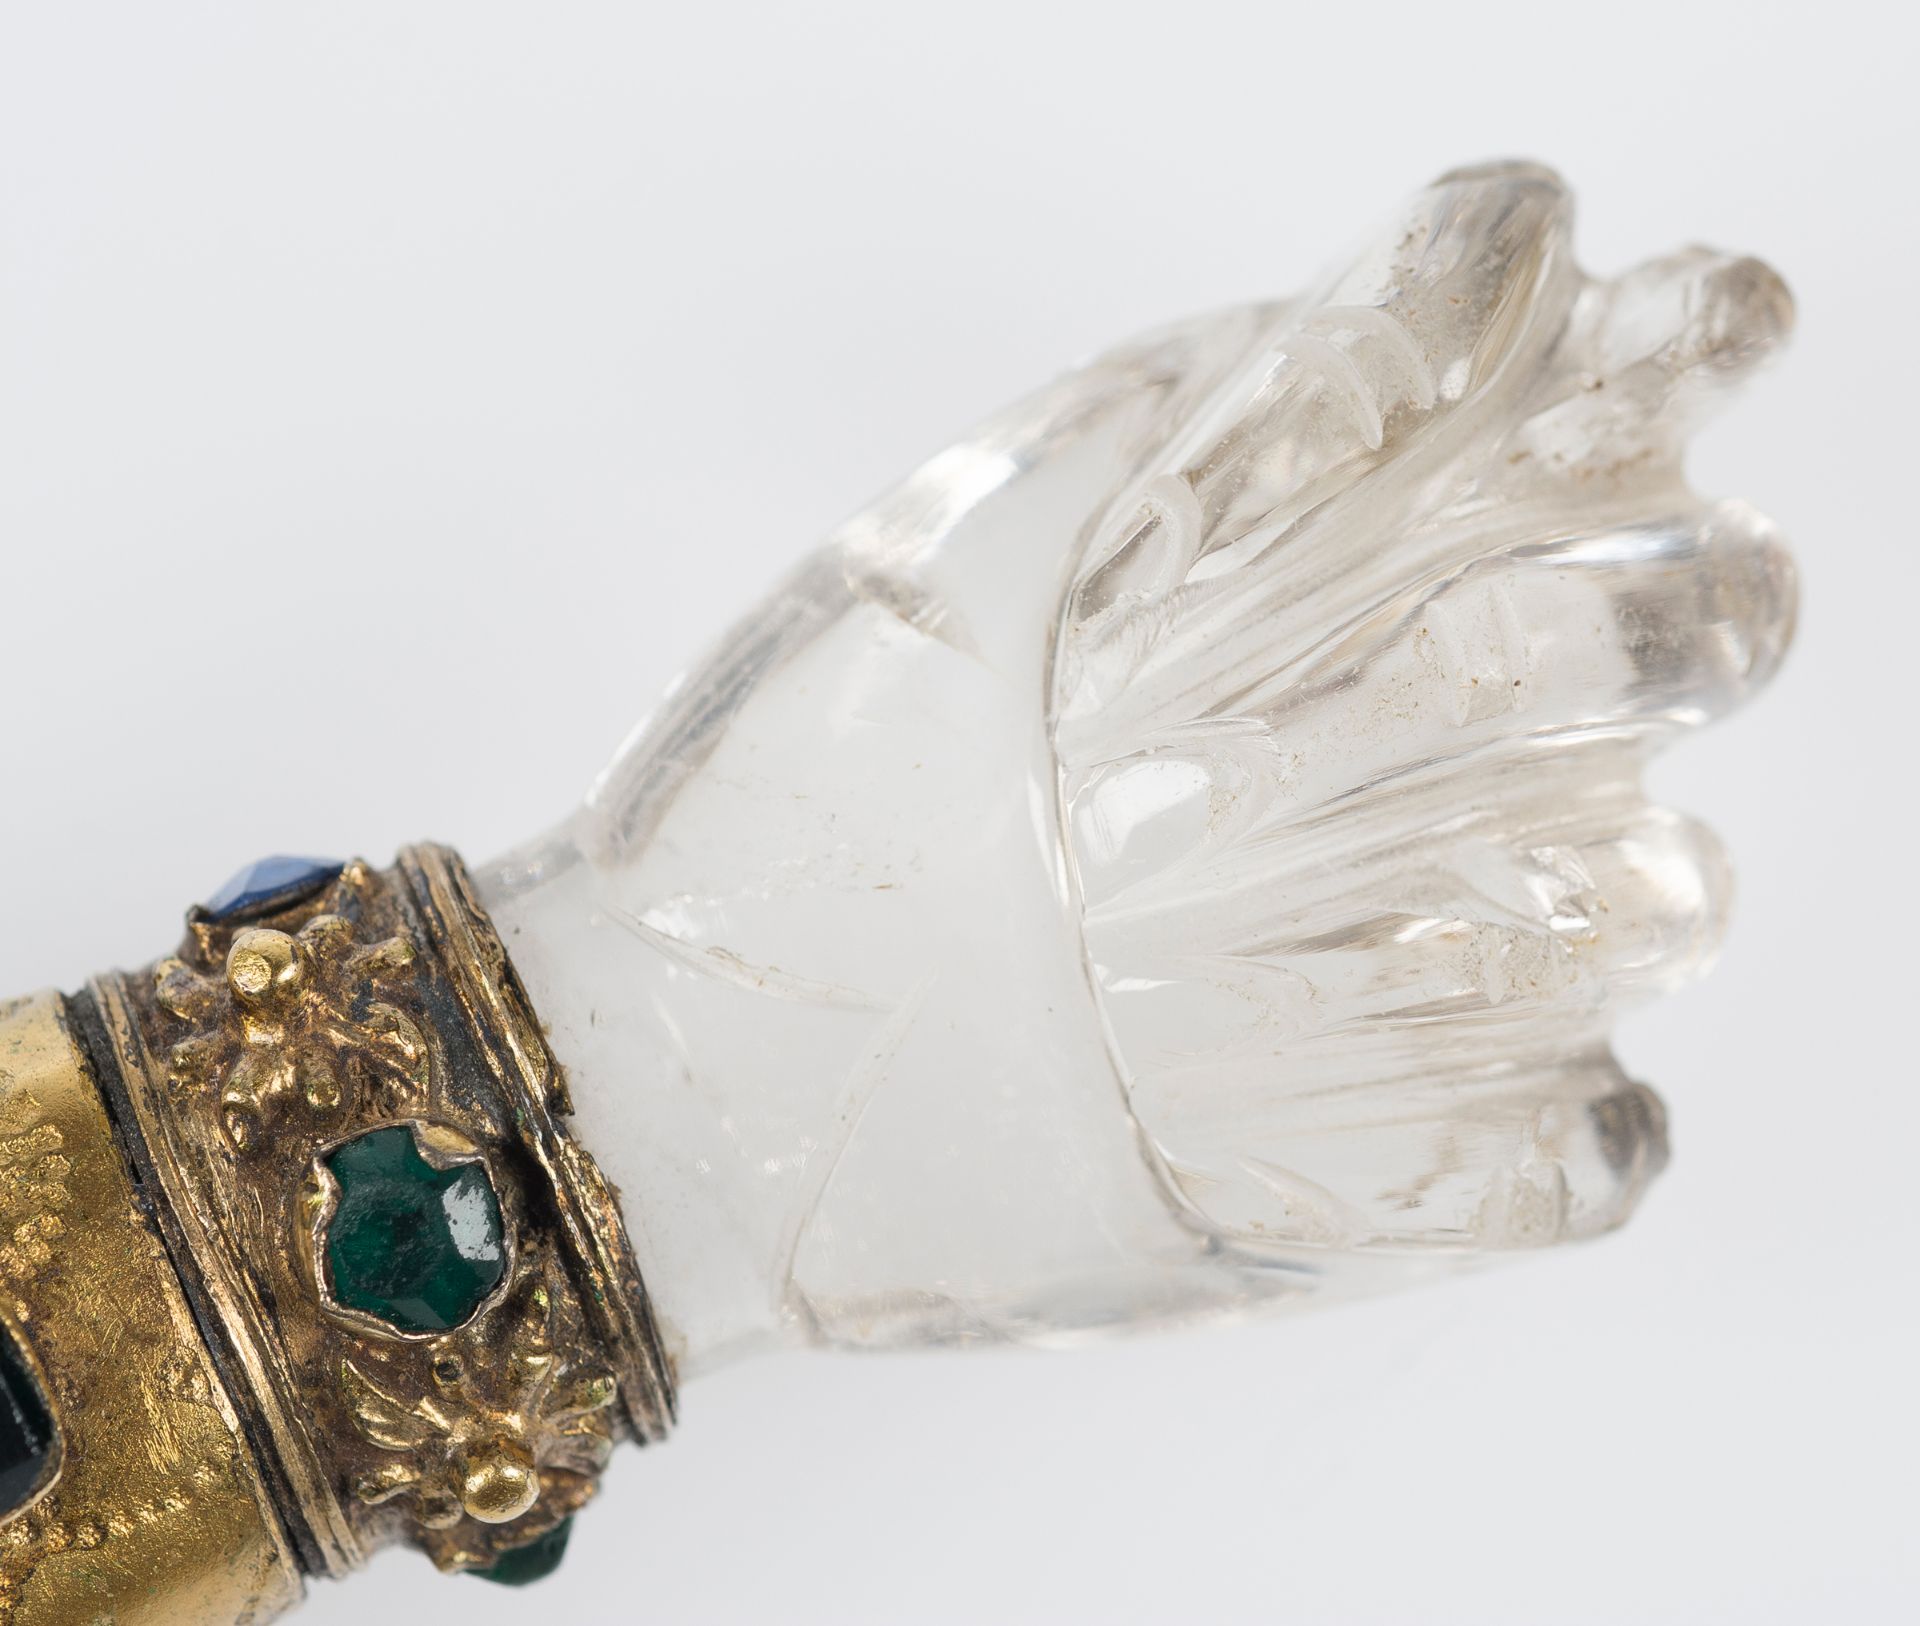 Rock crystal and gilded copper figa with precious stone cabochons. Gothic. 15th century. - Image 6 of 7